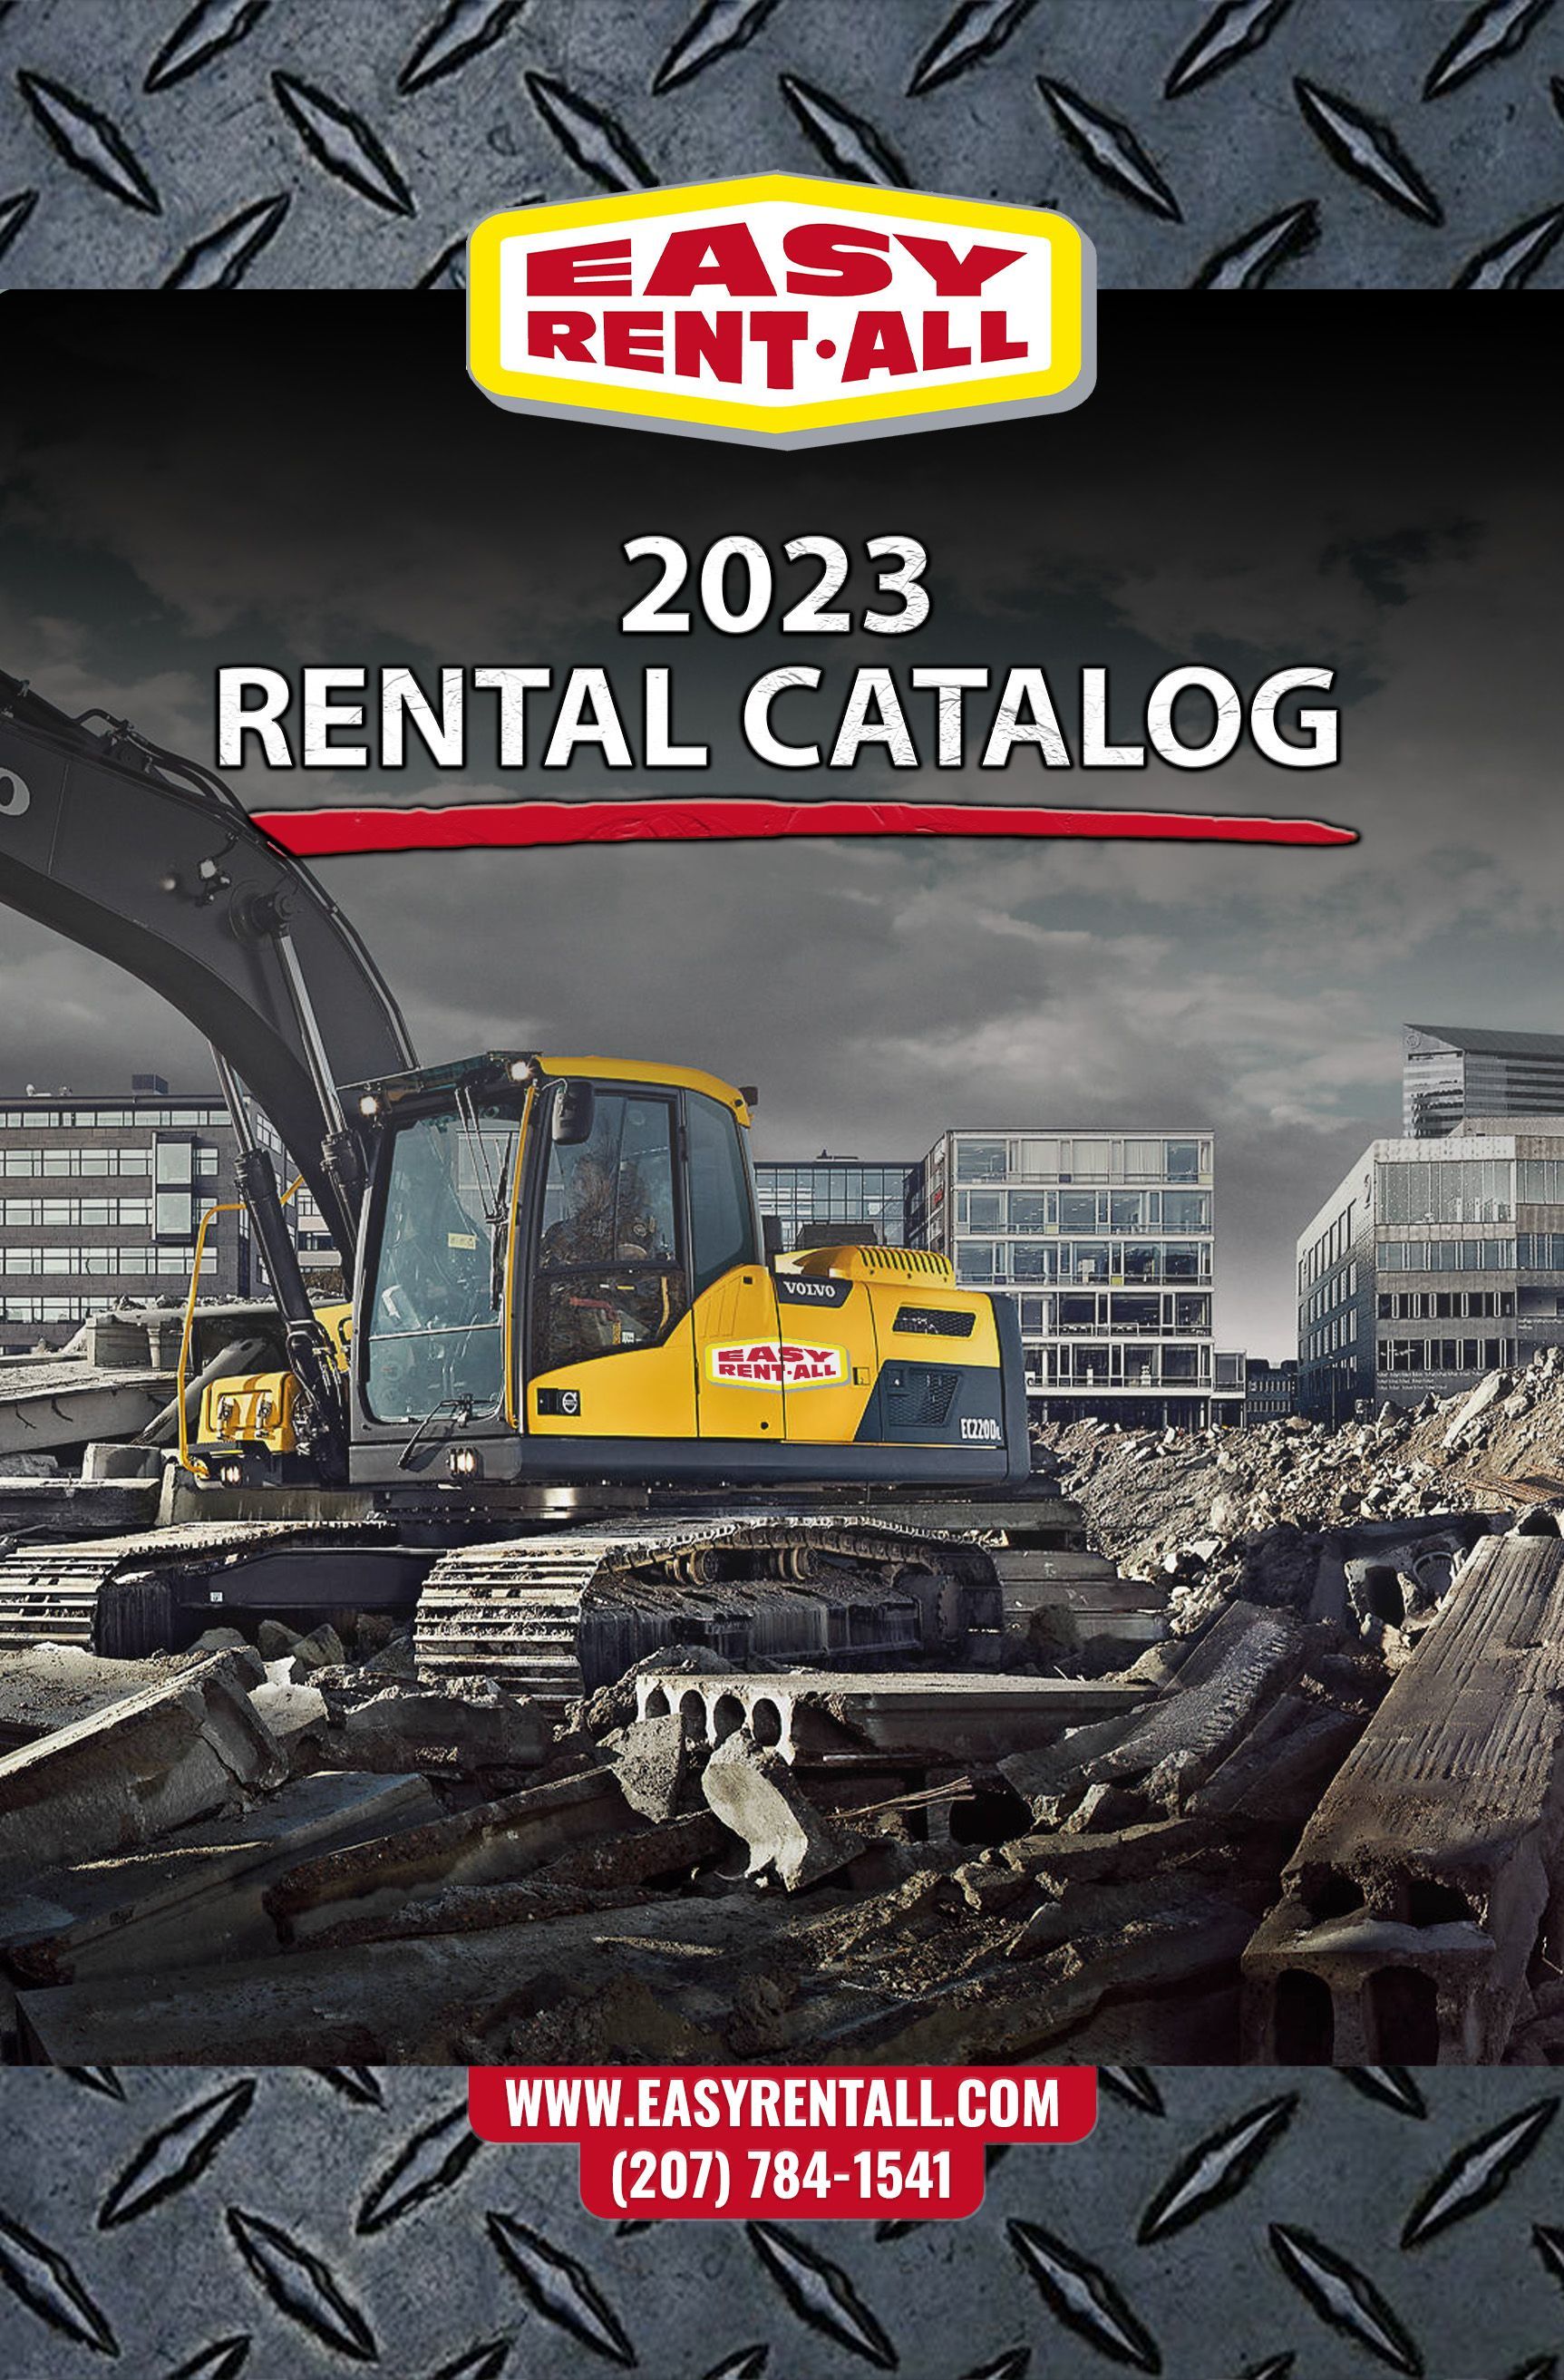 it is a rental catalog for Easy Rent All